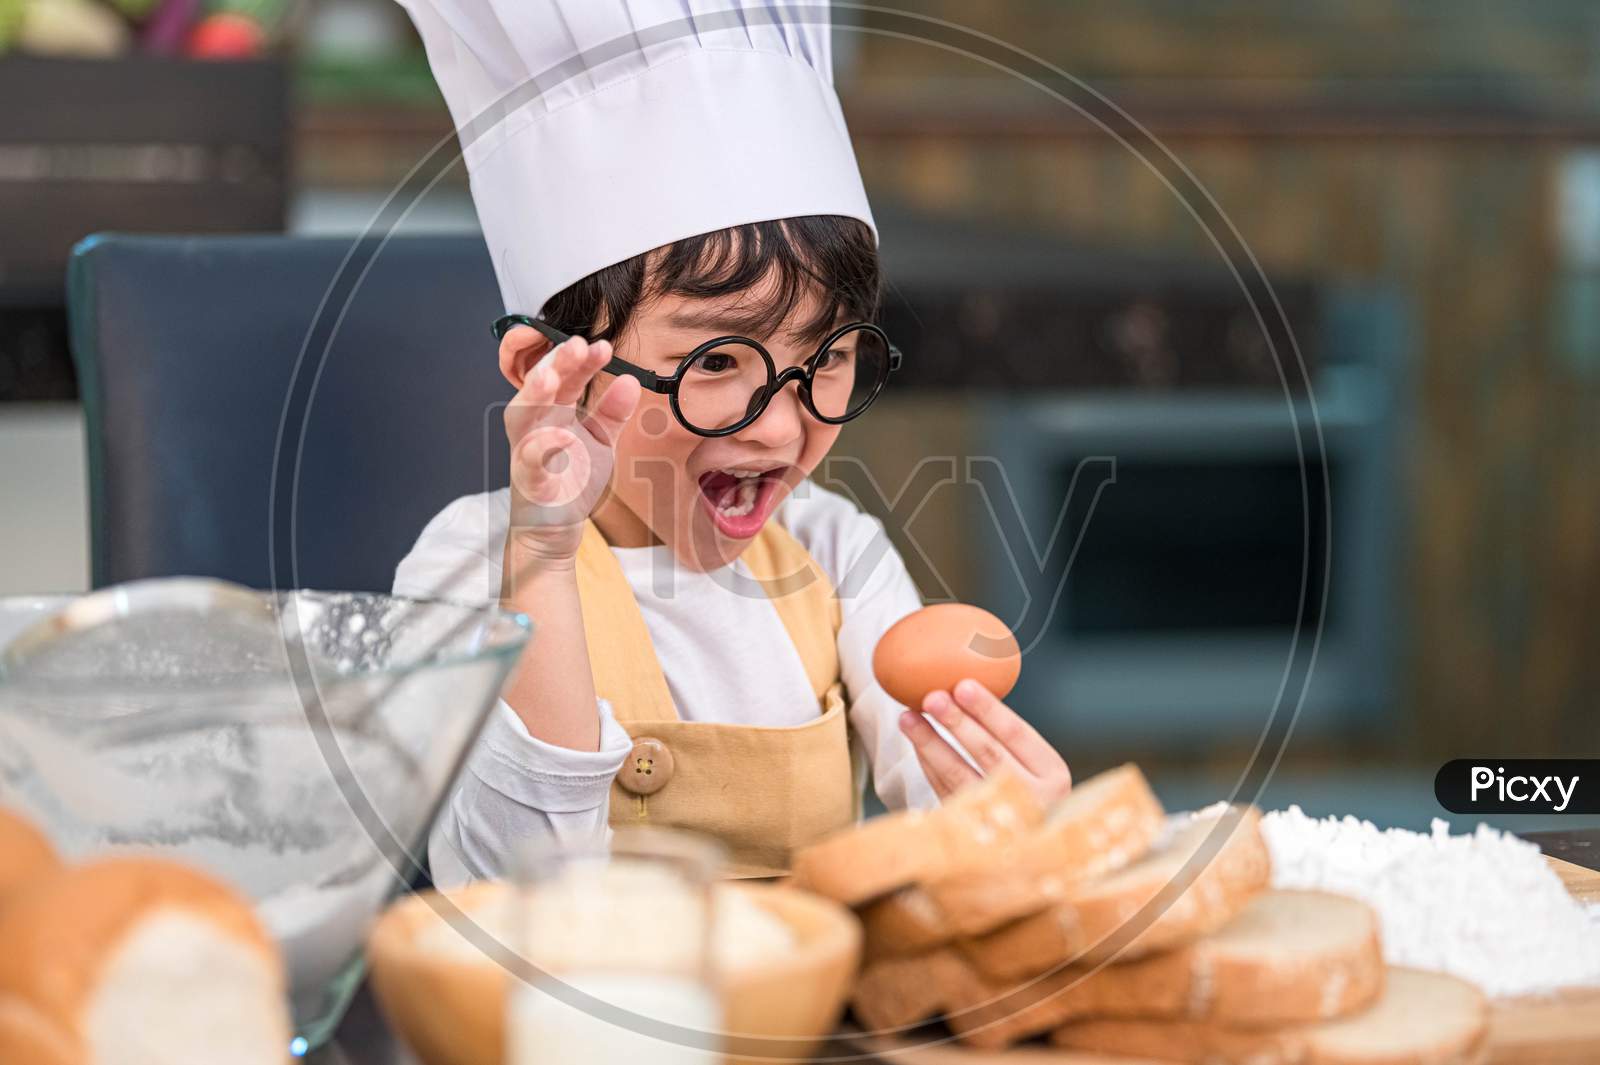 Portrait Cute Little Asian Happy Boy Surprised And Interested In Cooking Funny In Home Kitchen. People Lifestyles And Family. Homemade Food And Ingredients Concept. Baking Christmas Cake And Cookies